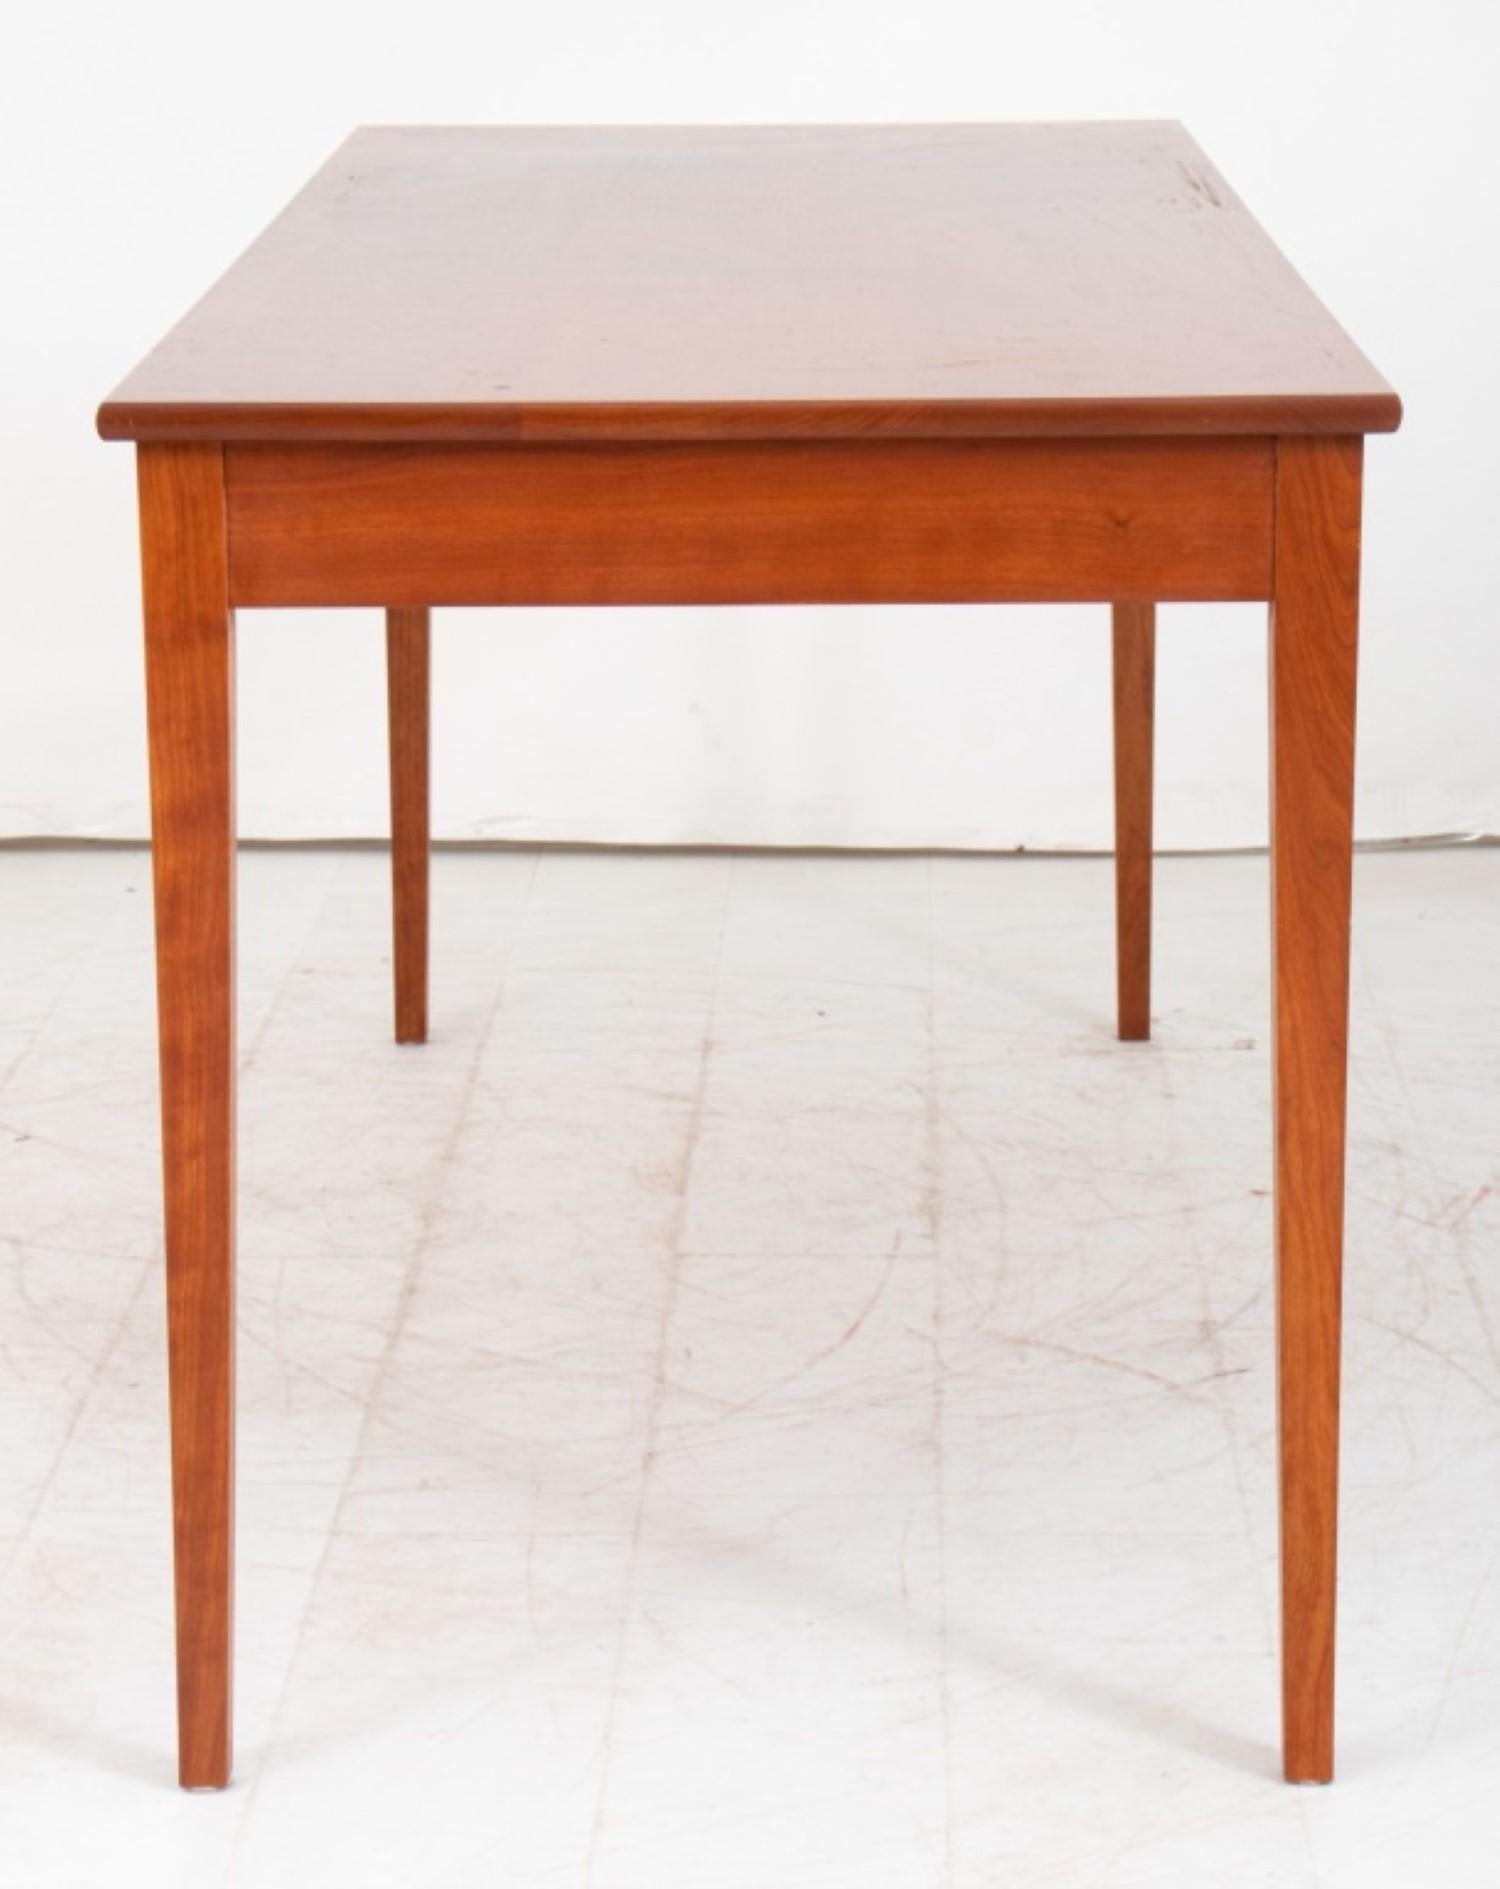 20th Century American Cherry Sofa Table For Sale